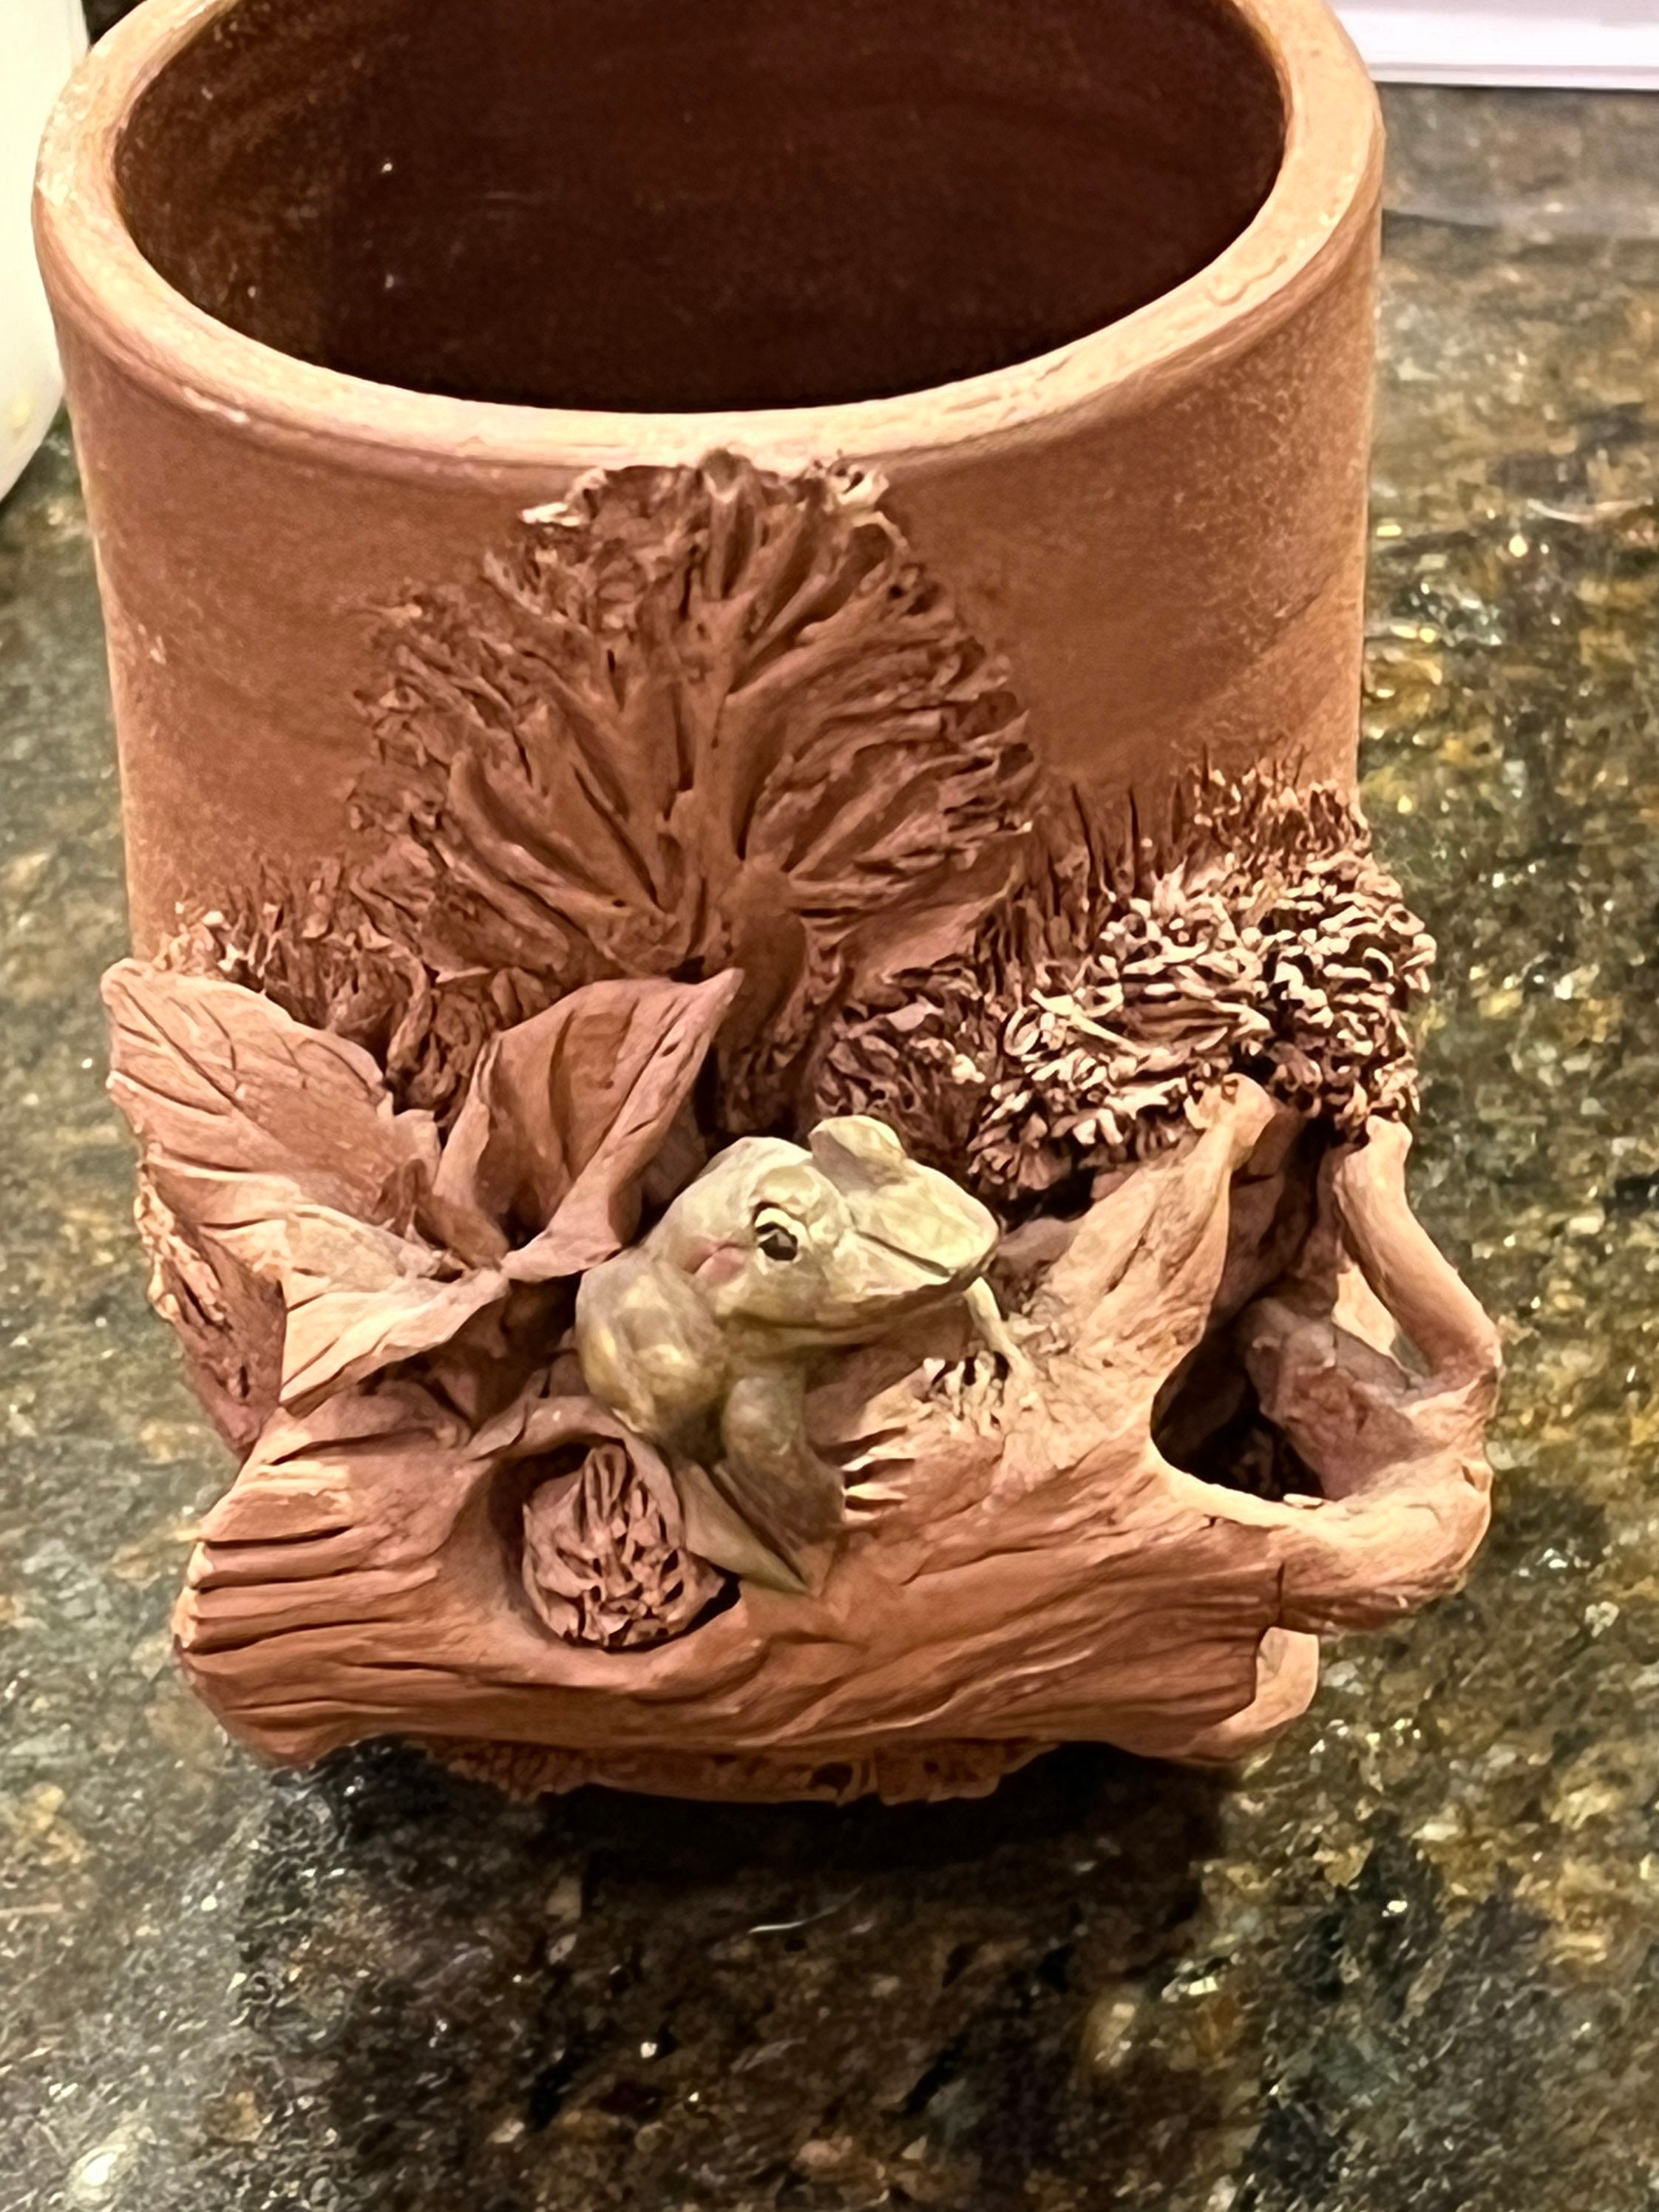 j hale frog on branch cup pottery This piece is from a noted sculpture making a green frog on the outside of a thrown pottery piece.3”3”3”